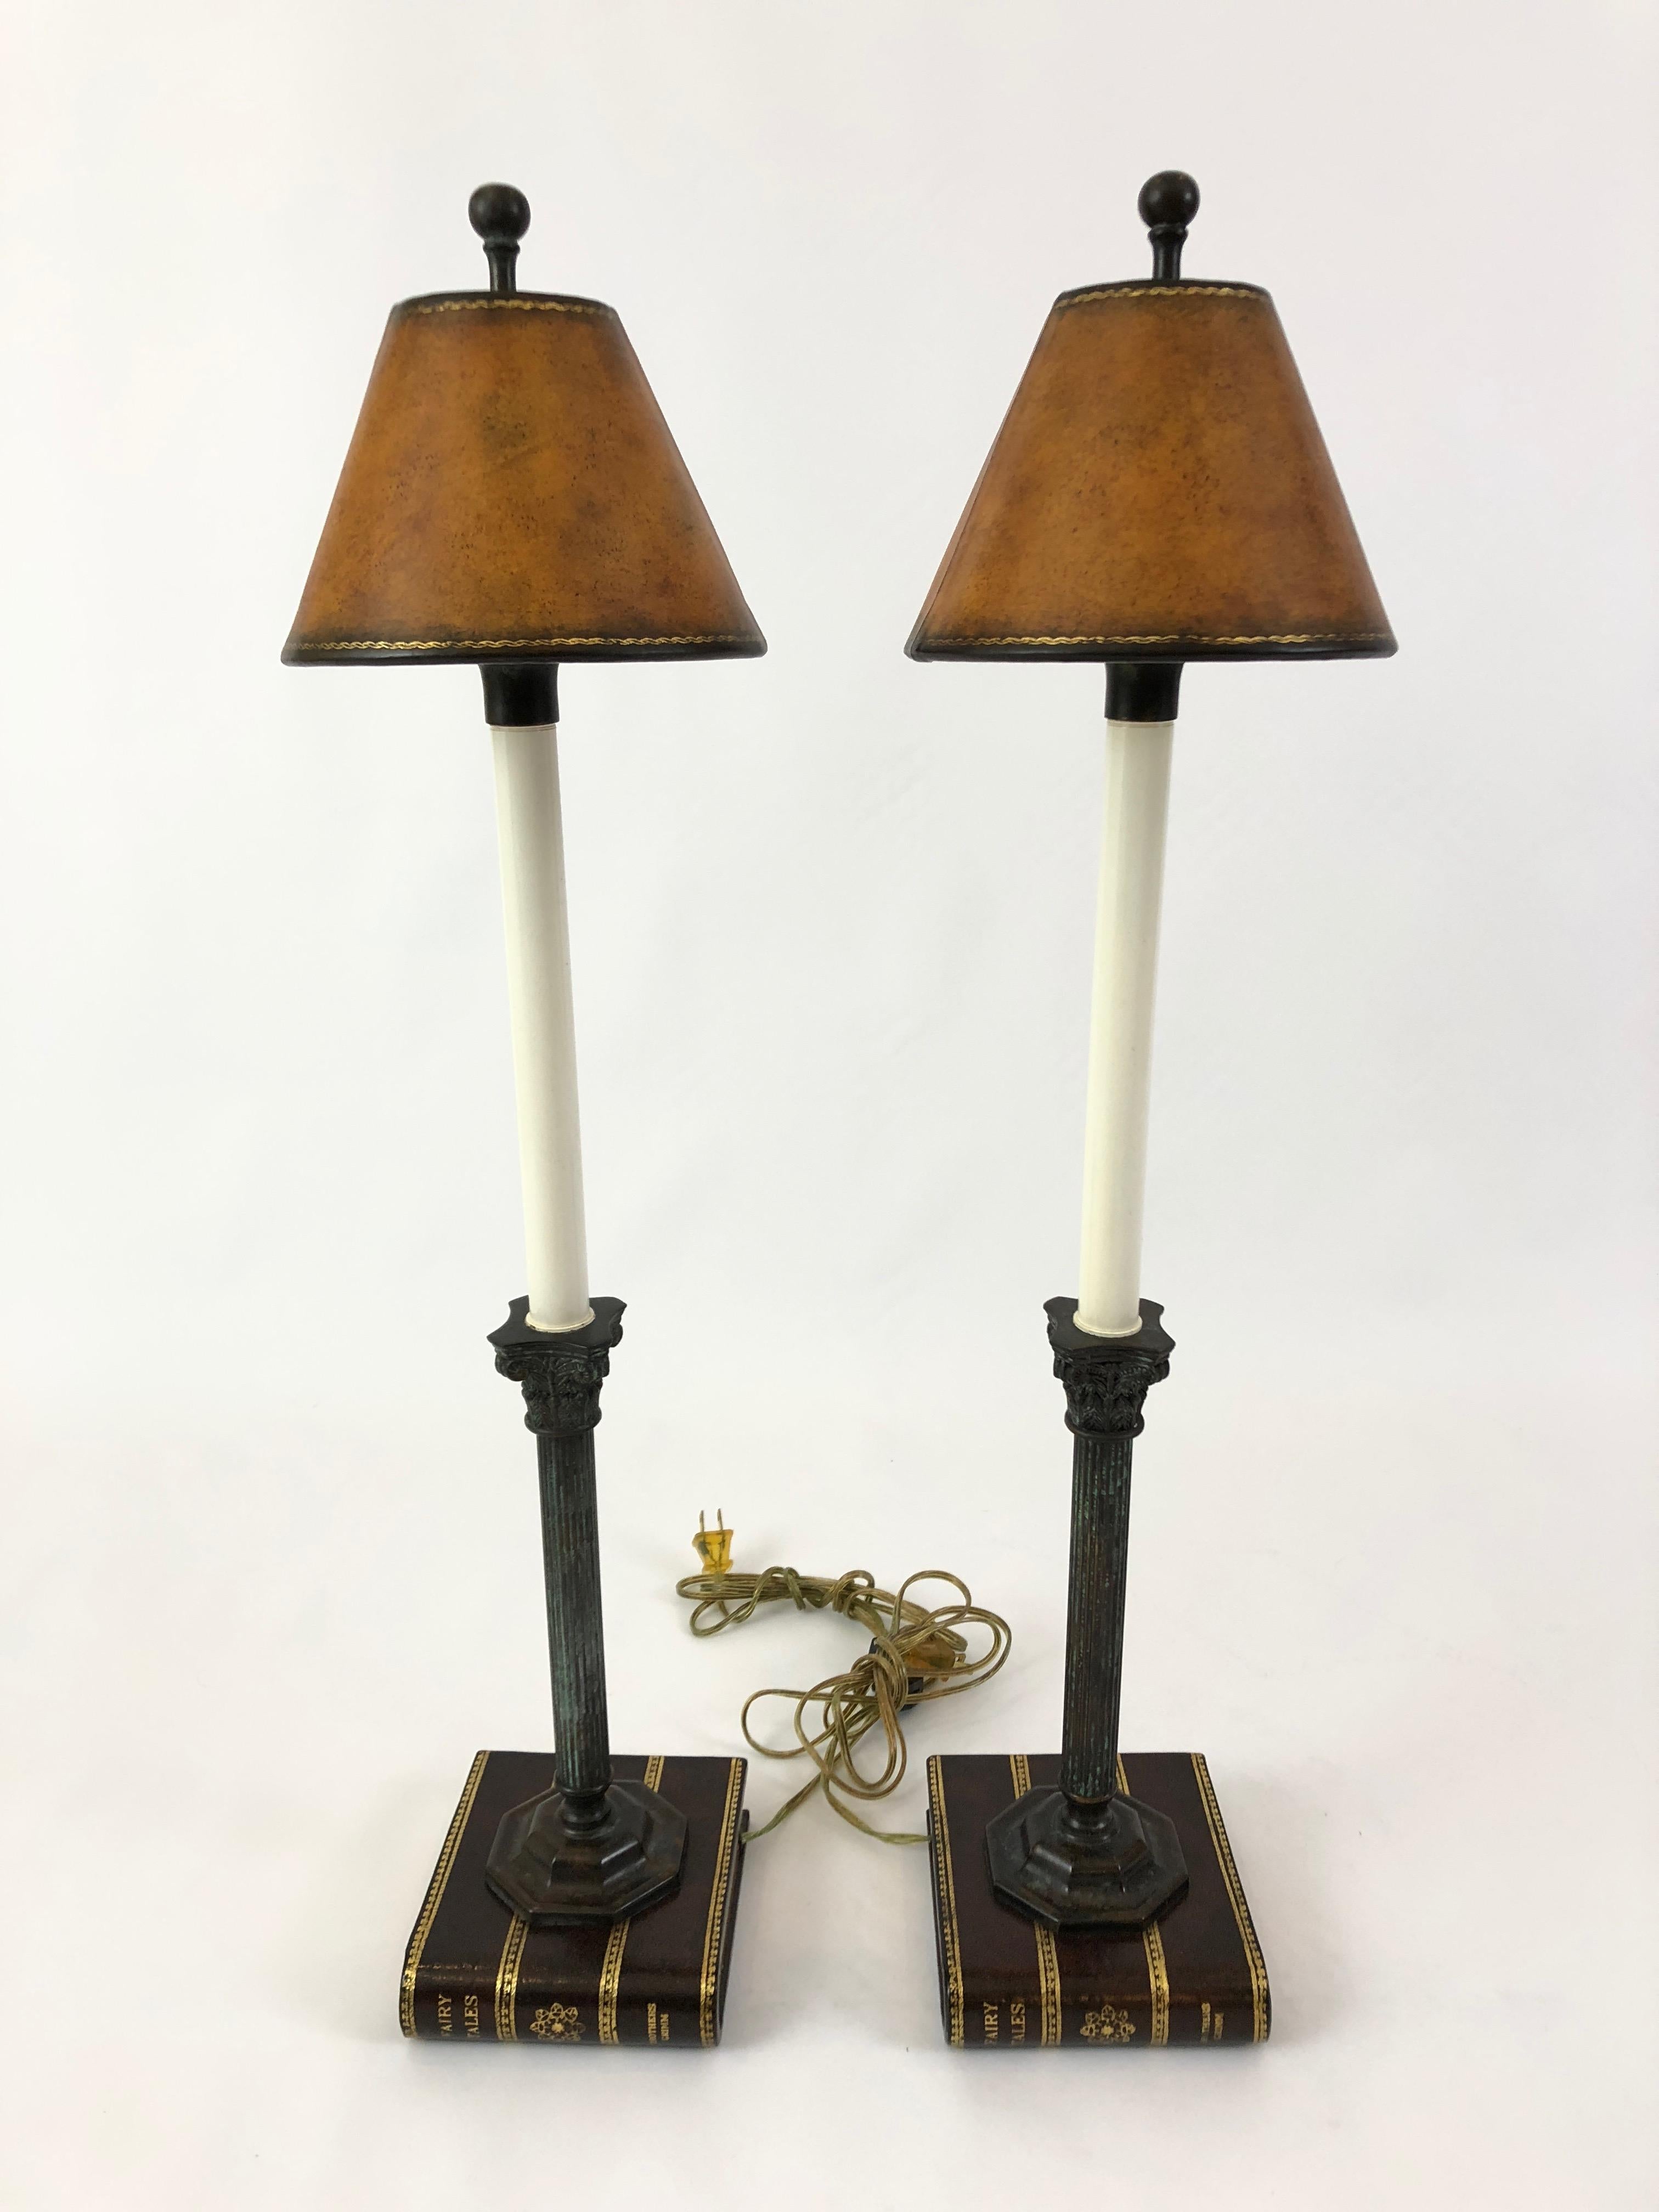 A clever pair of table lamps having bases that look like fancy leather and gold leaf books, with handsome carved wood neoclassical column candlesticks topped with leather shades.